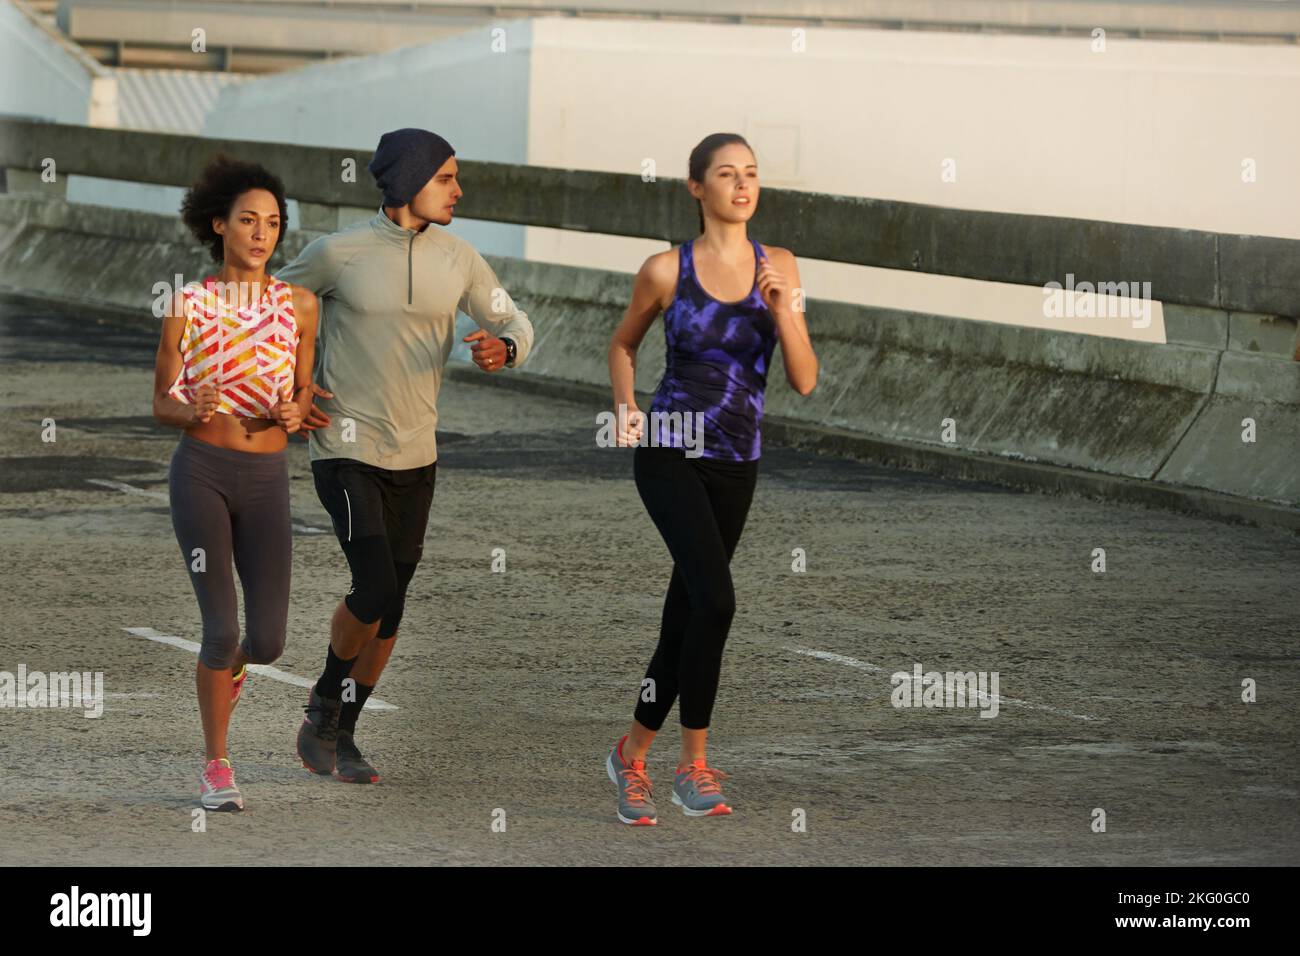 Freedom of an early morning run. three friends jogging together in the city at sunrise. Stock Photo